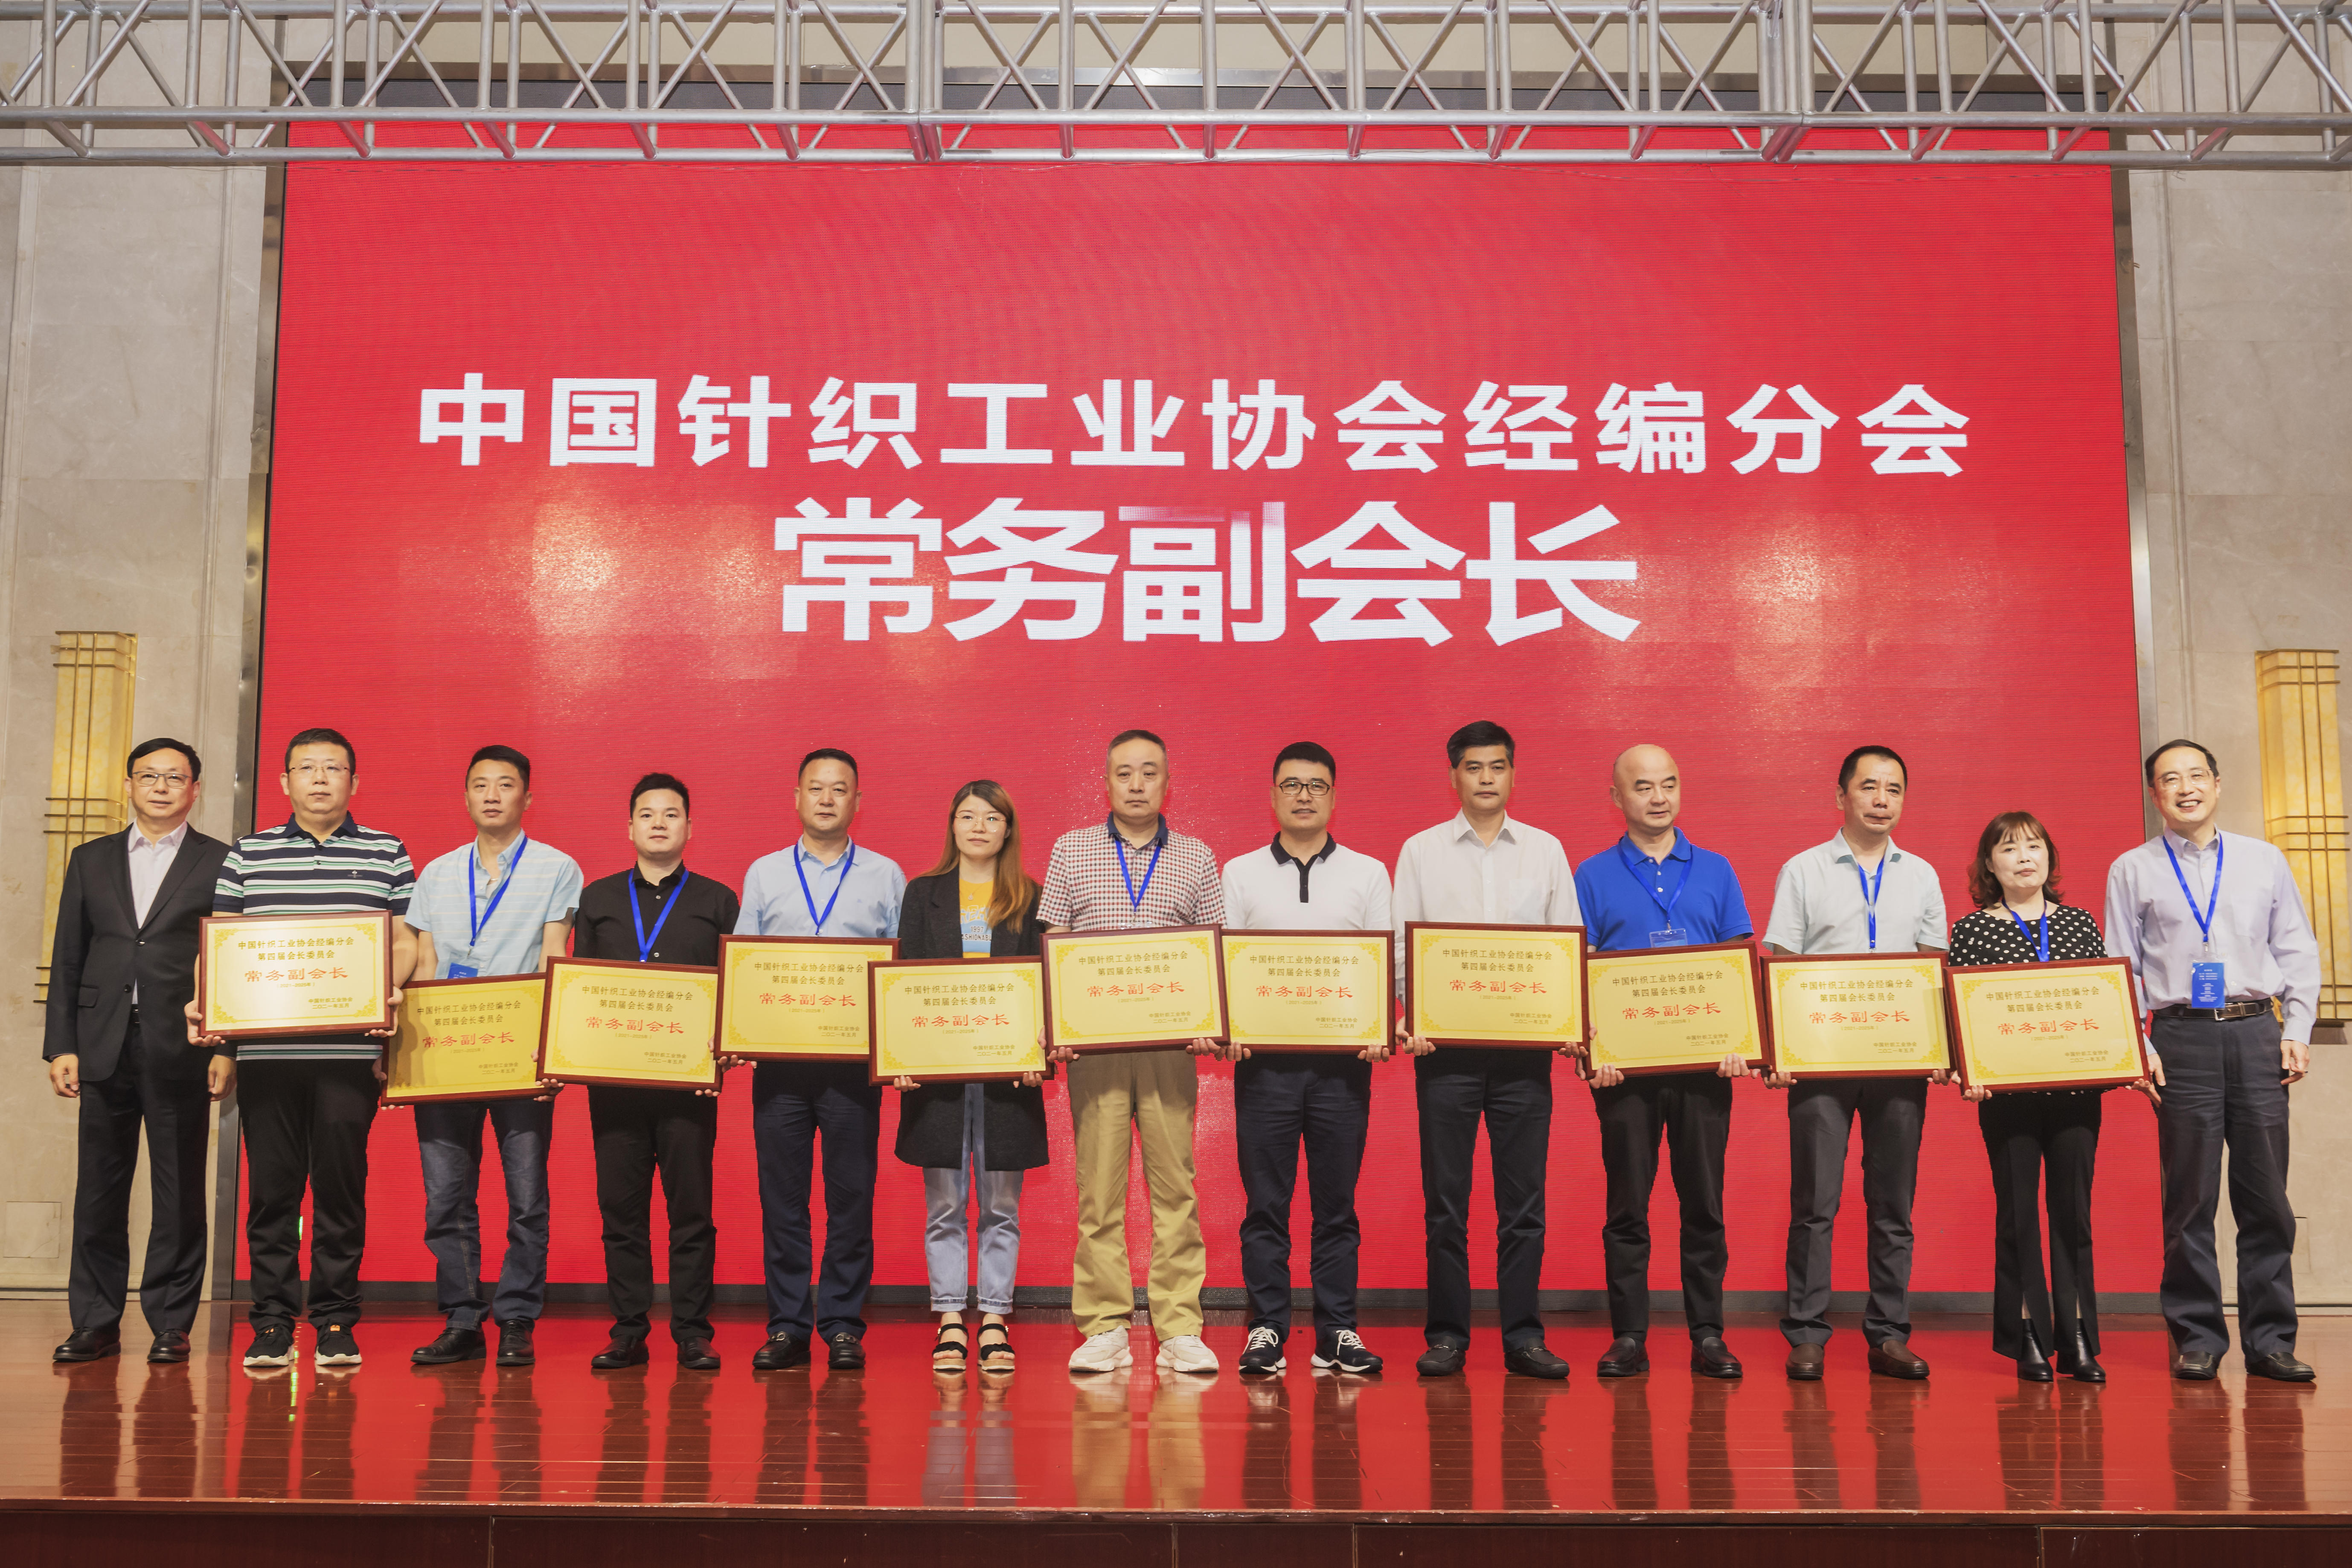 【Airport Information】Airport Company won the honor of "Top 10 China Warp Knitting Industry in 2020" 